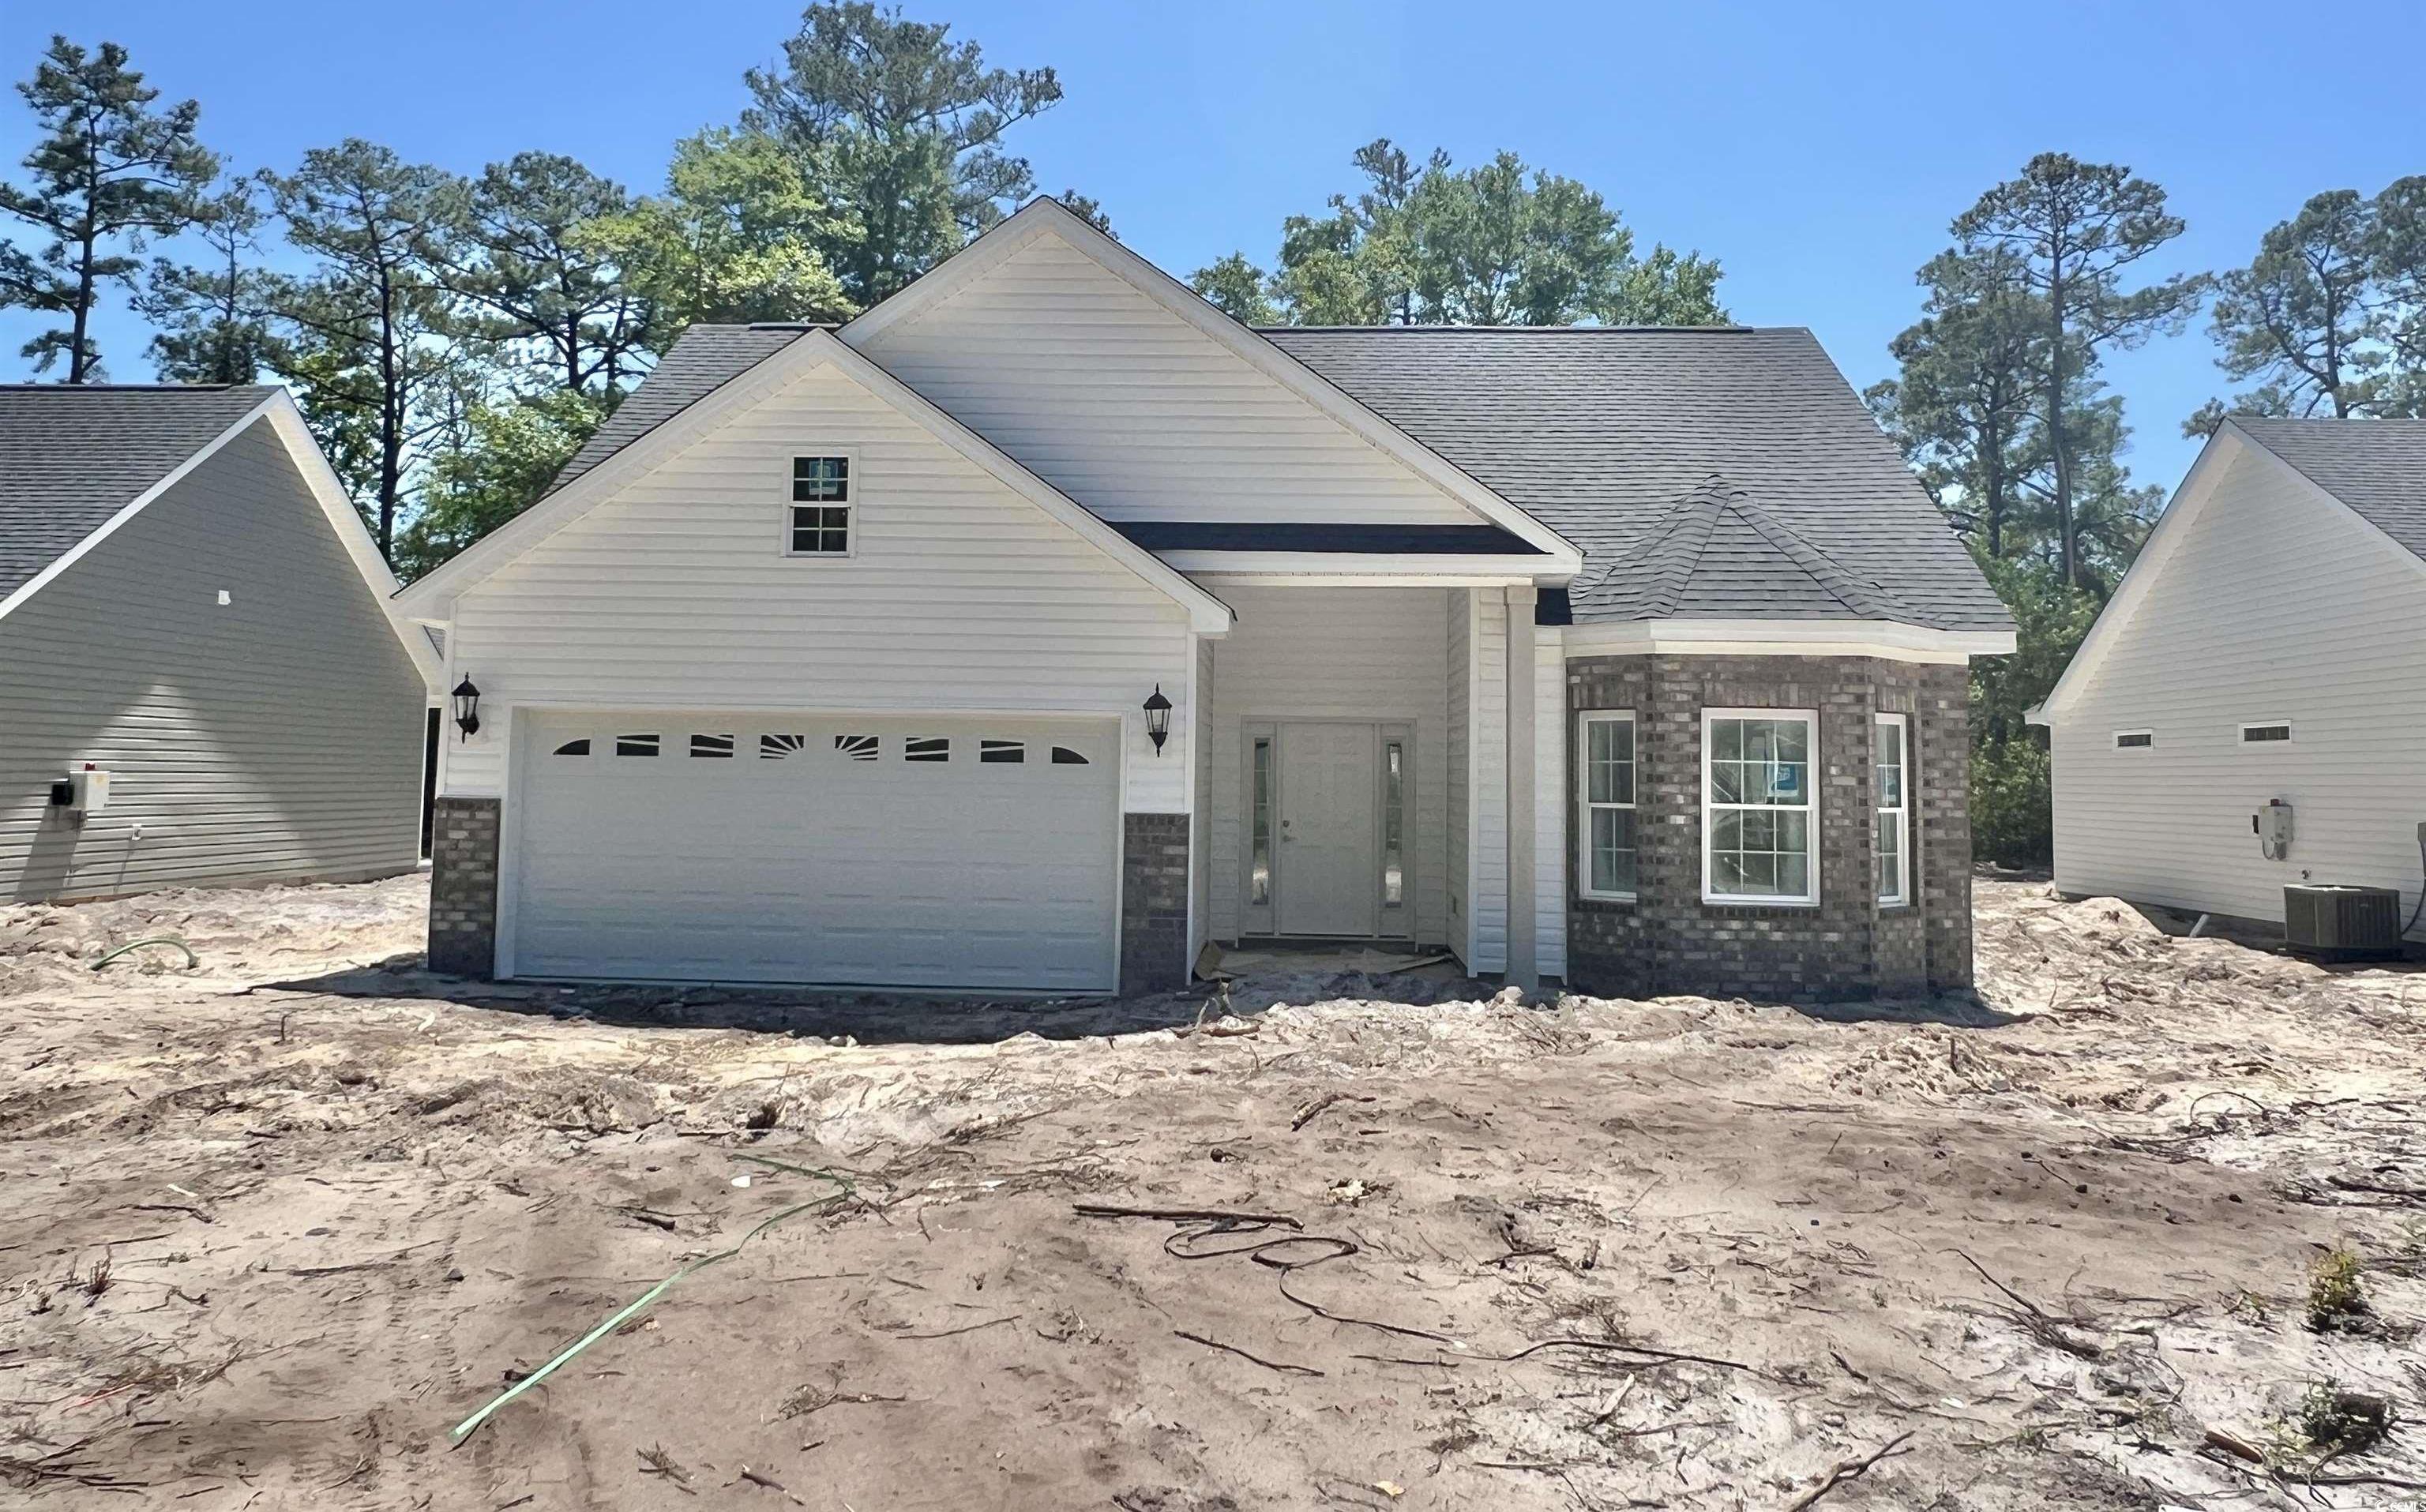 Photo one of 1622 San Andres Ave. Little River SC 29566 | MLS 2409600